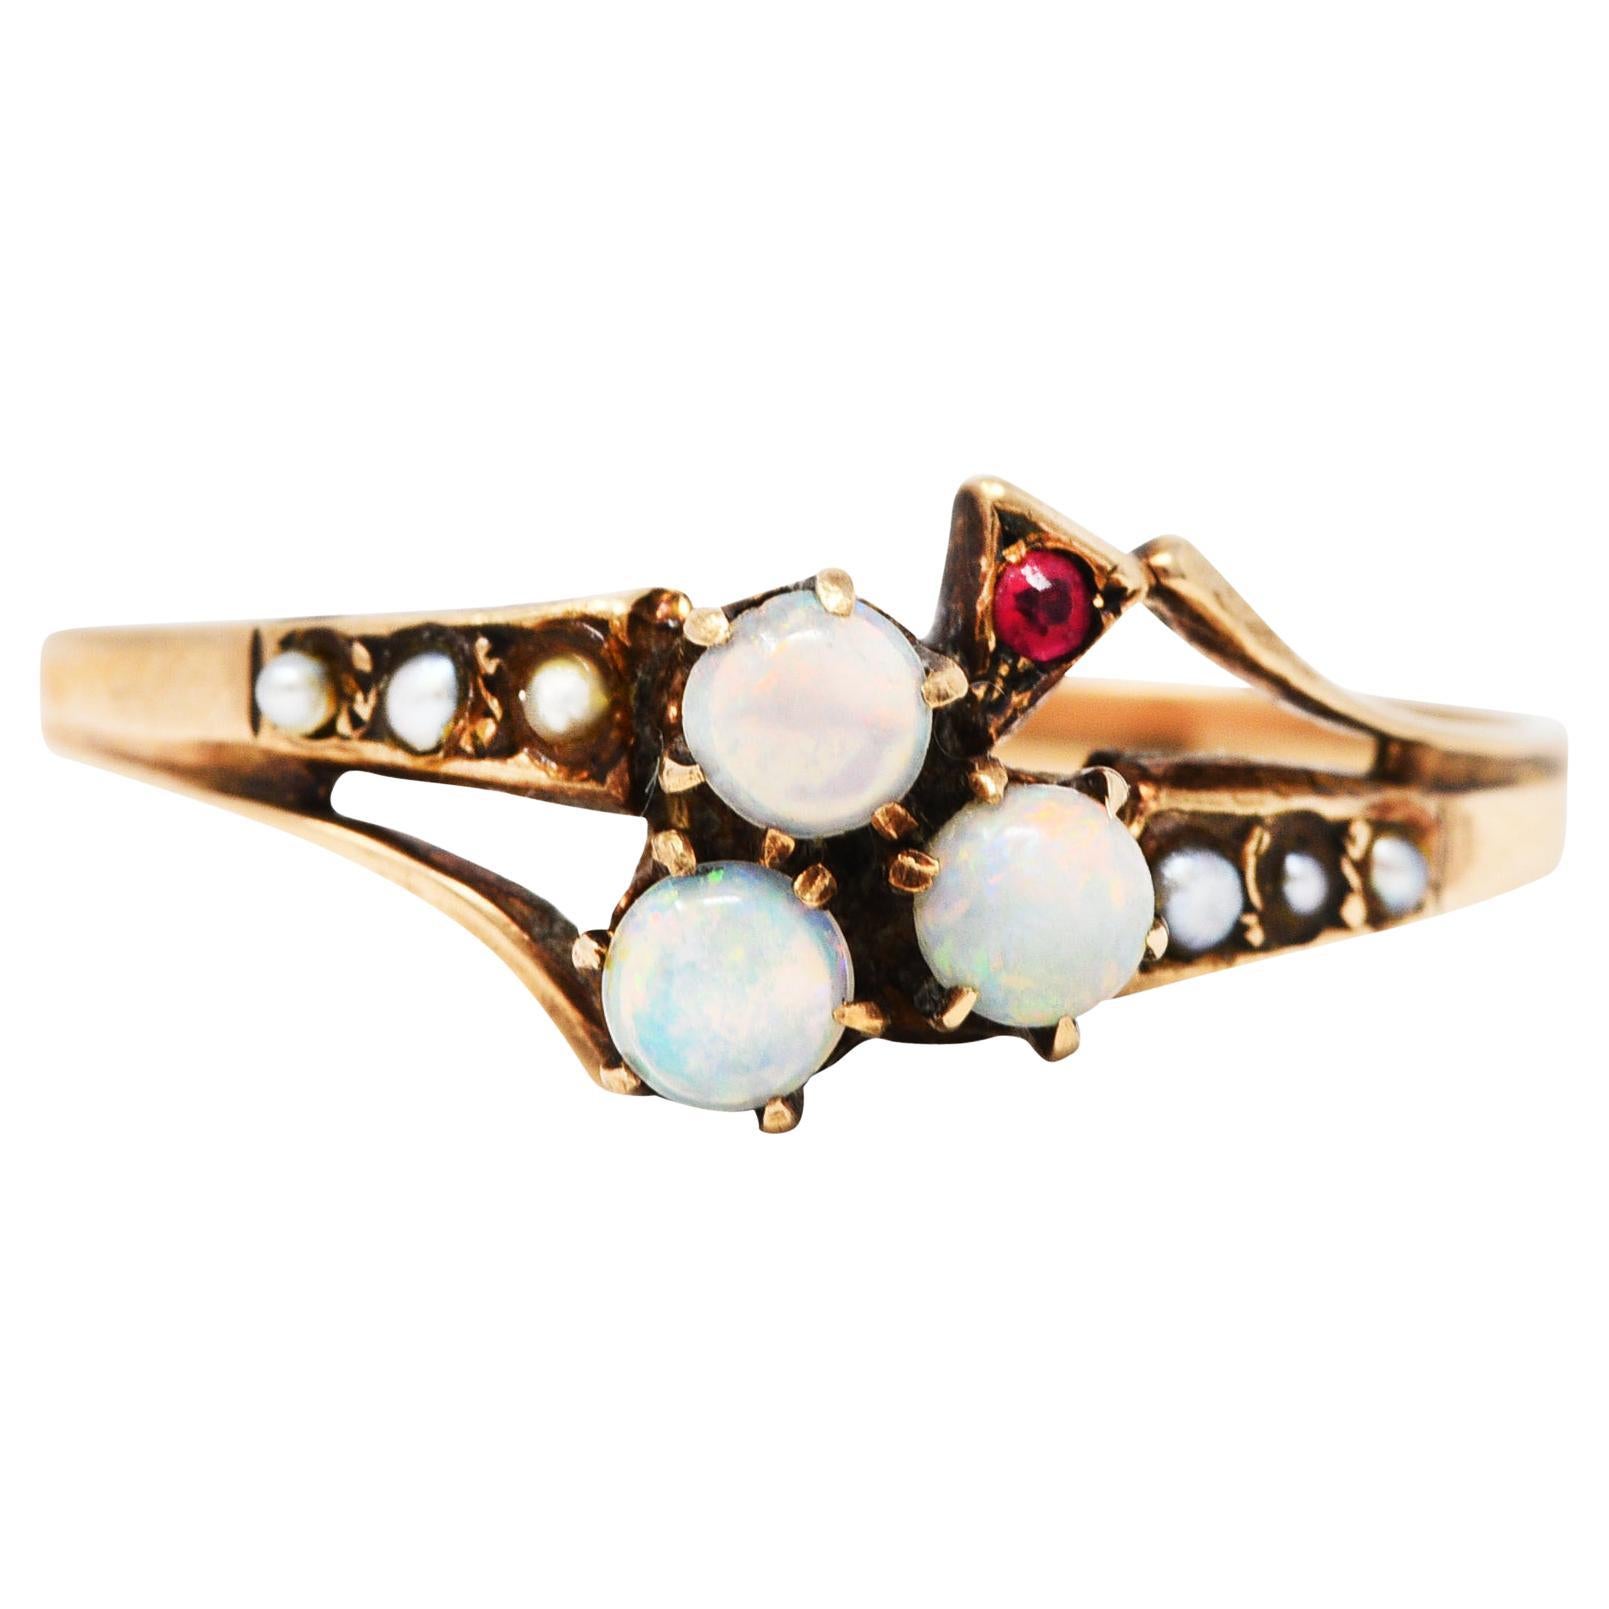 Ring depicts a clover motif comprised of three 3.0 mm round opal cabochons

Well matched in white body color with moderate to strong spectral play-of-color

Clover stem is accented by a bright red round cut ruby

With split bypass style shoulders